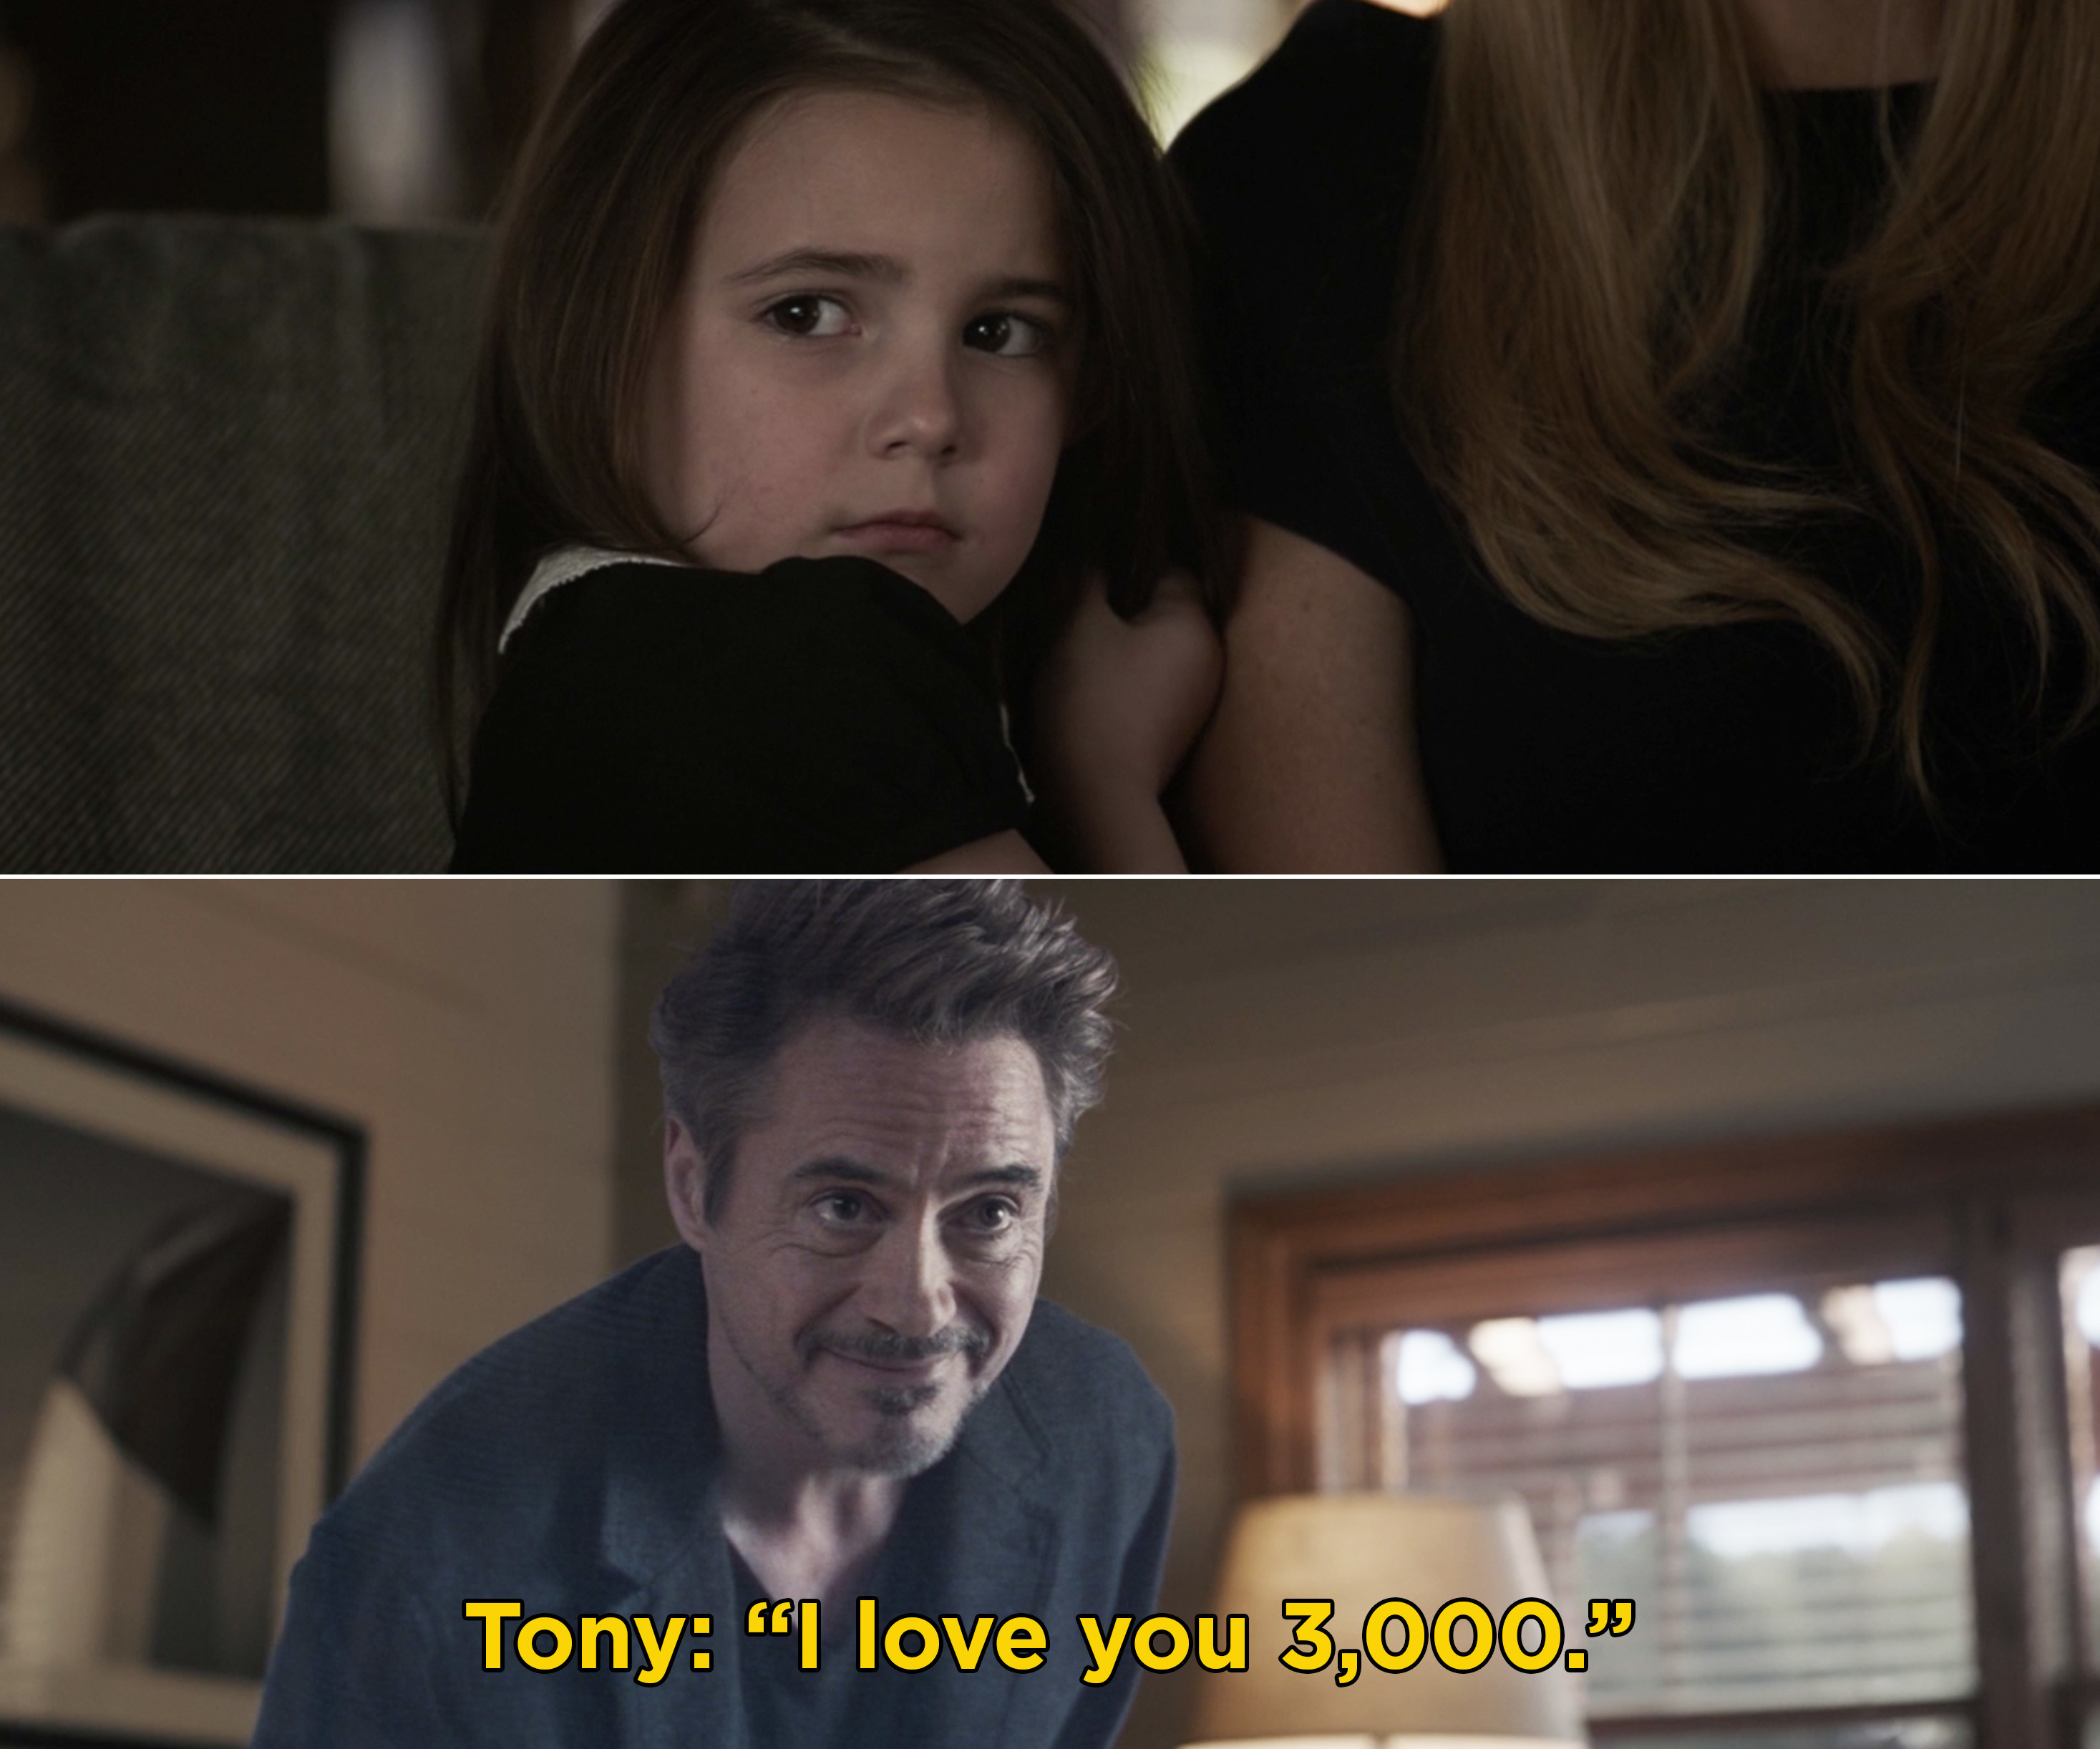 Tony, as a hologram, telling Morgan that he loves her 3,000